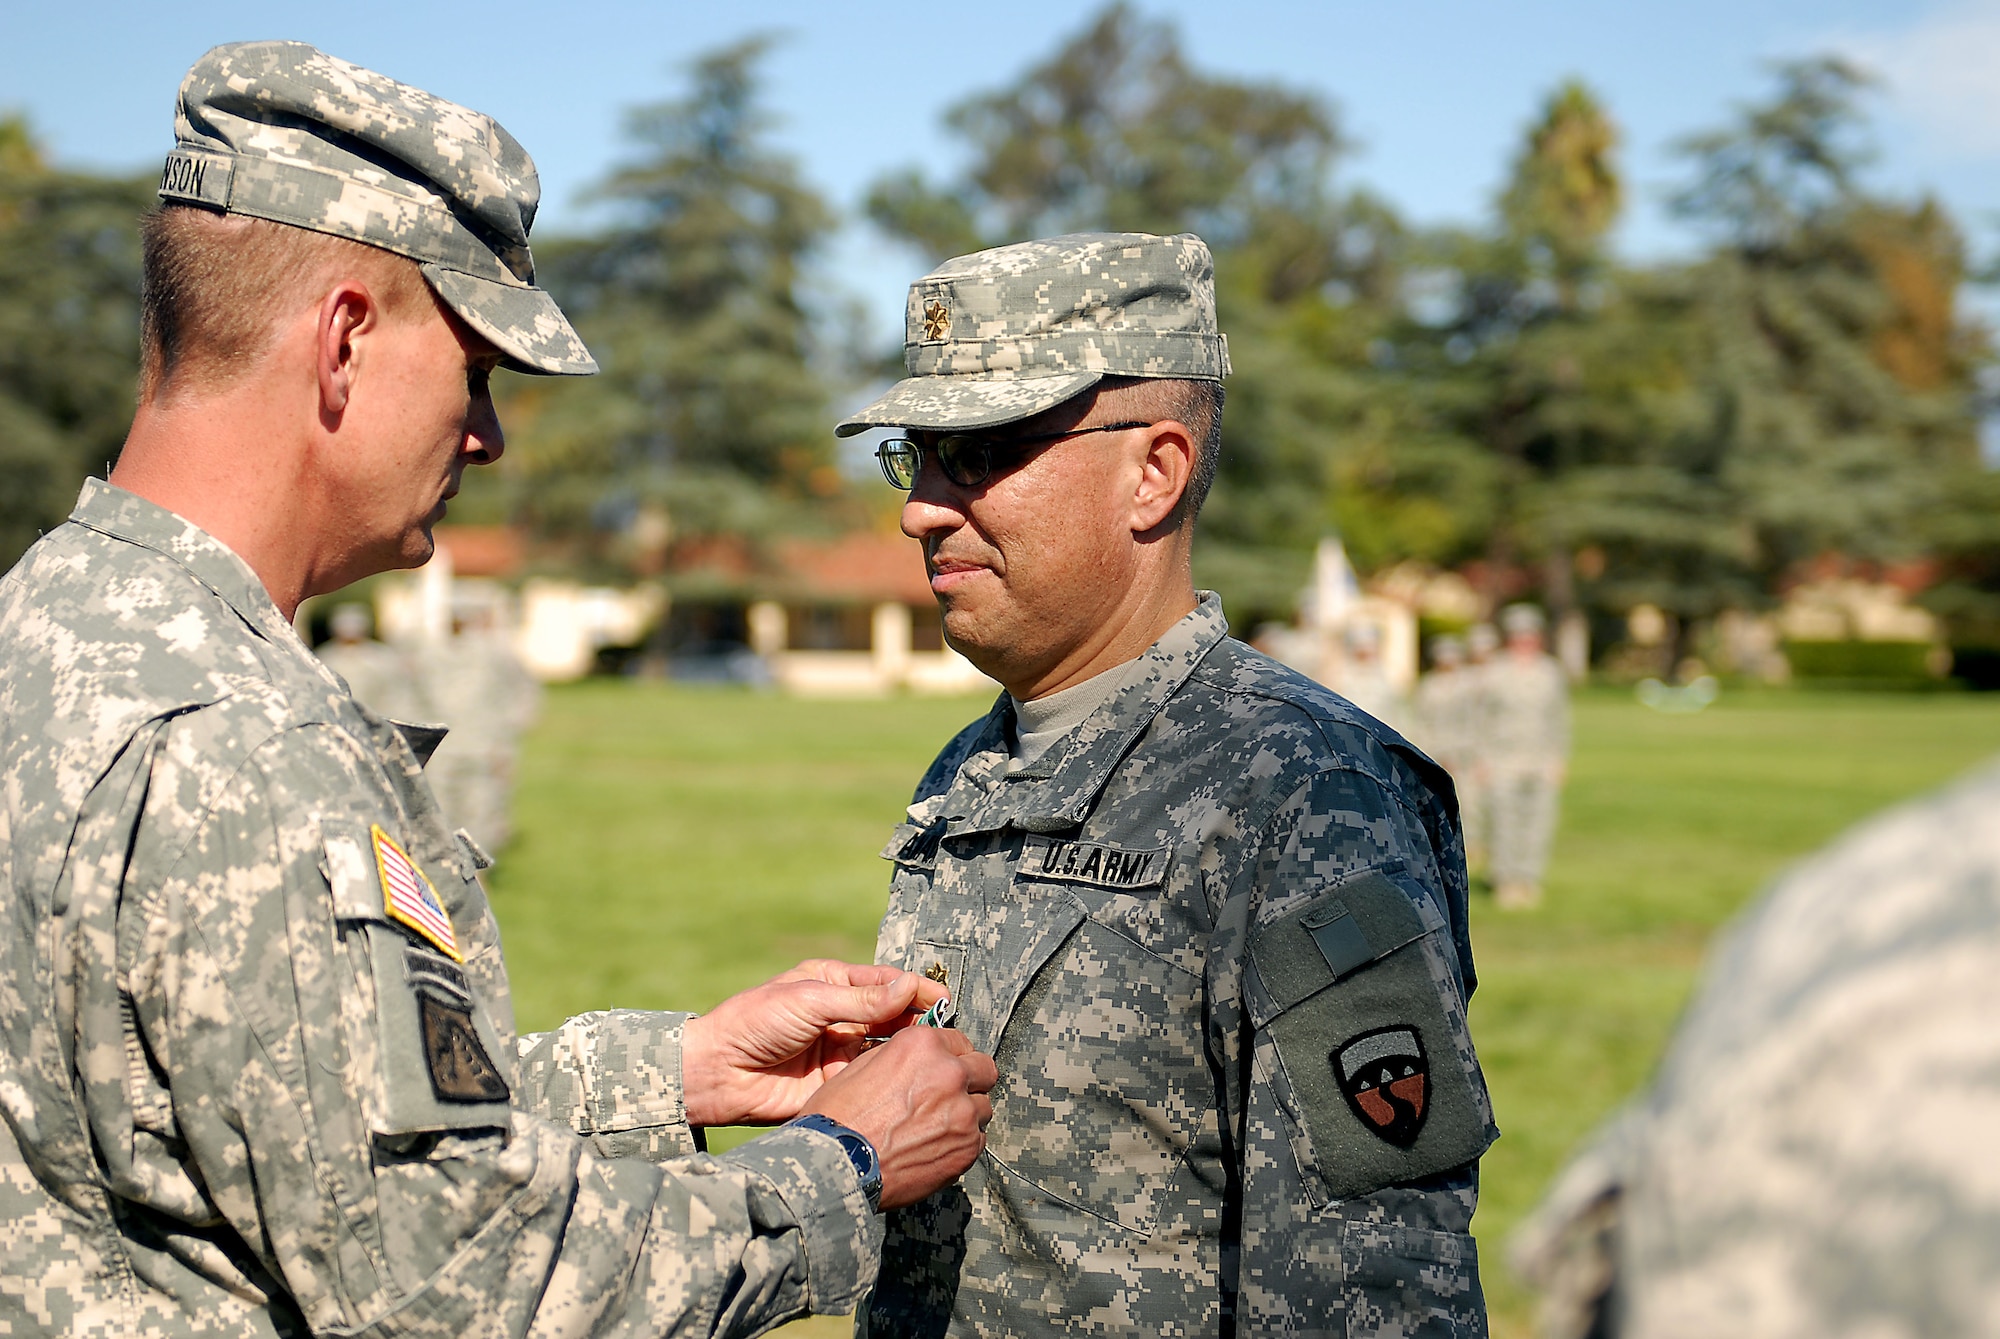 Army Col. Scott Swanson, commander of the 304th Sustainment Brigade, pins the Army Commendation Medal on Army Maj. Edward Amaya, the outgoing commander of the brigade’s Special Troops Battalion, in a ceremony held Sunday, Oct. 9, 2011 at March Air Reserve Base, Calif. Amaya has commanded the battalion since returning from Iraq in 2008 and will now hold a position in the Operations Section at the 311th Sustainment Command (Expeditionary) in Los Angeles. (US Army photo by Sgt. Ruben Chicas)